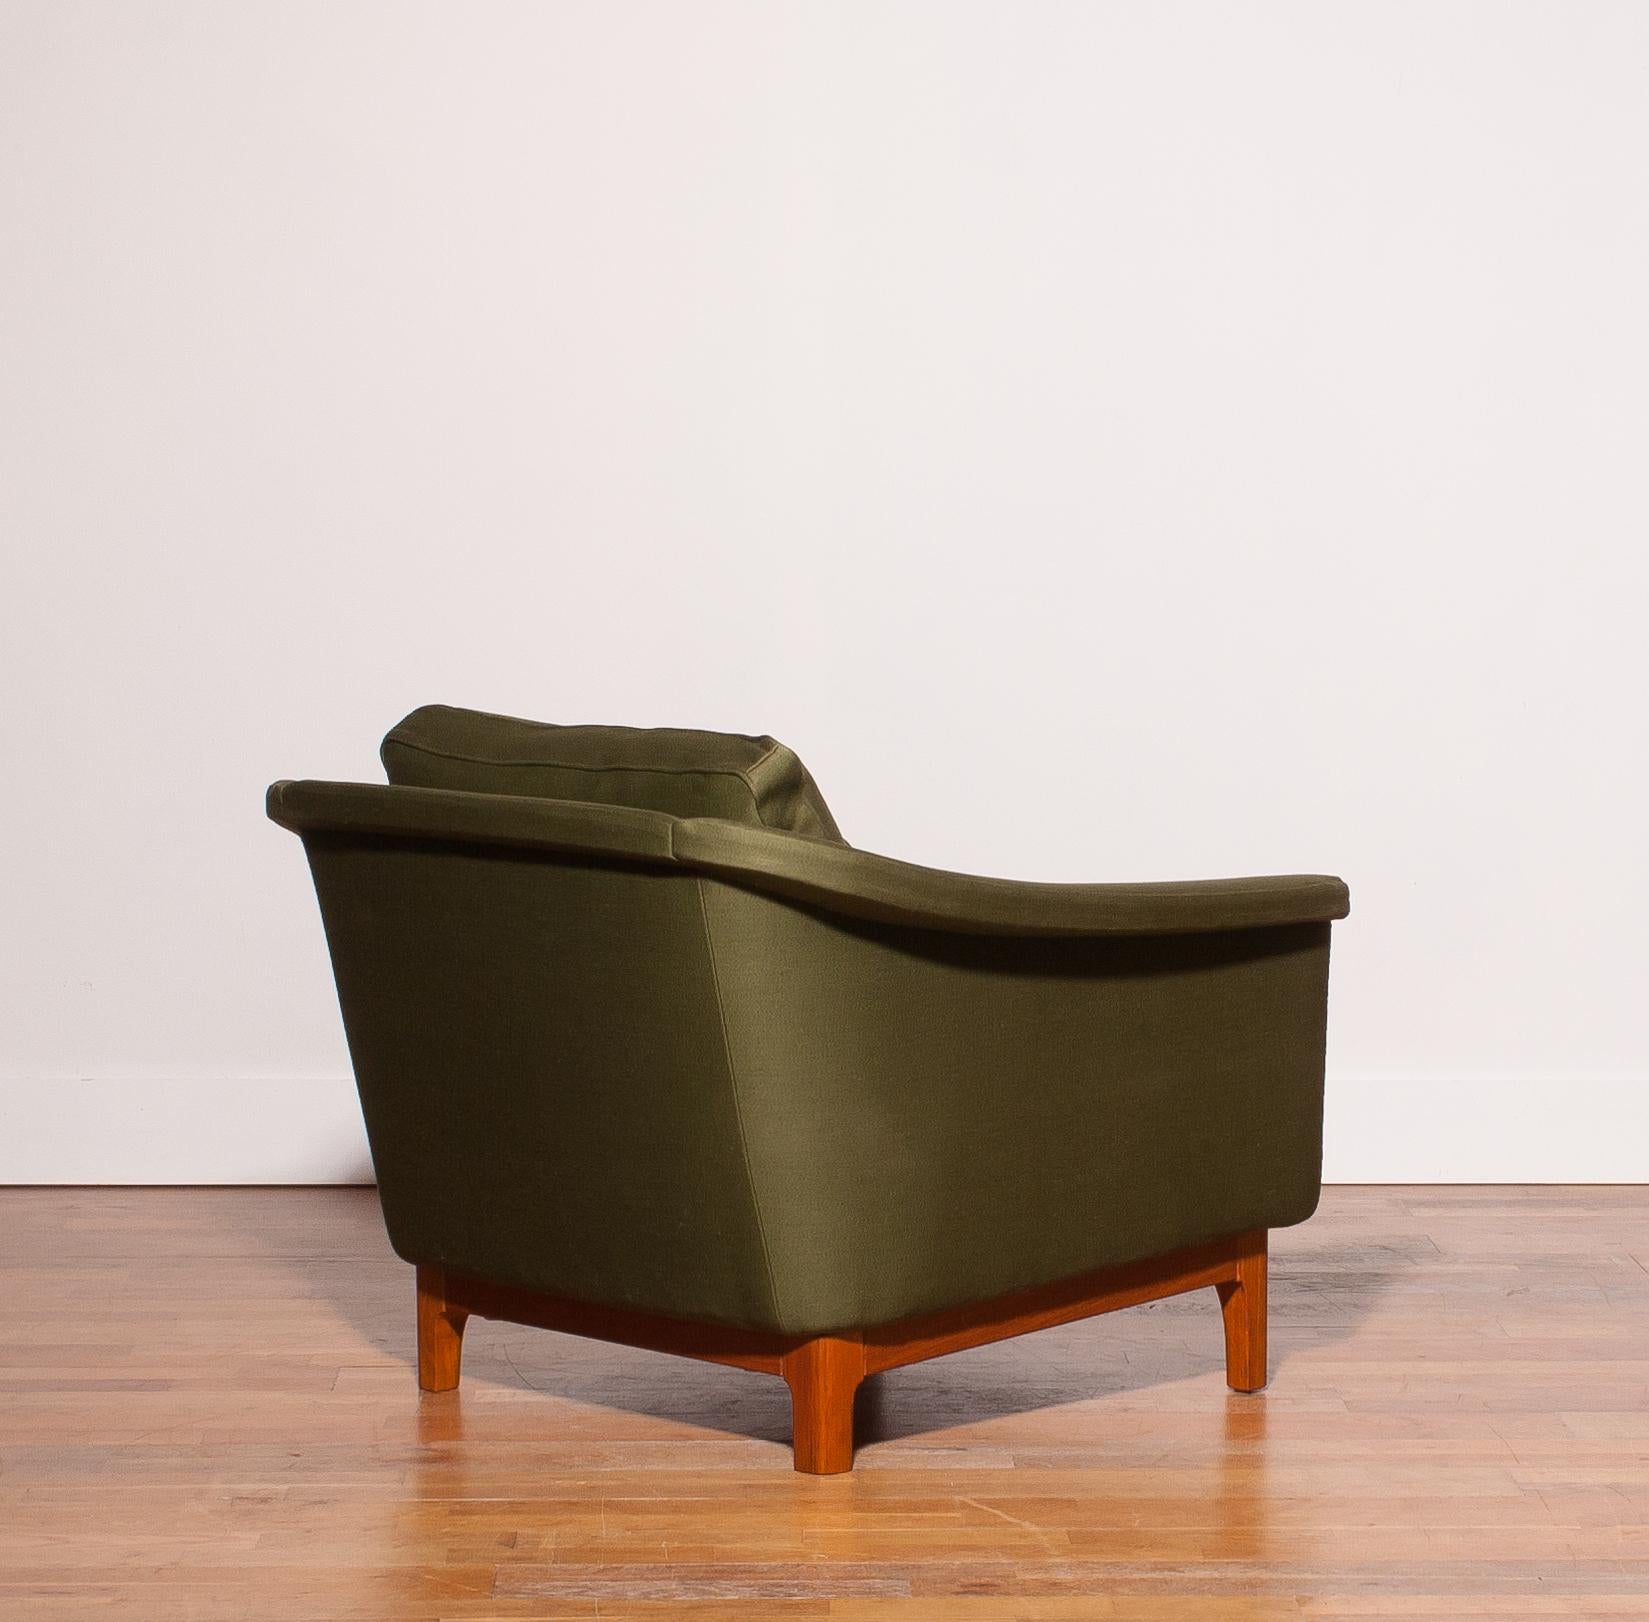 Swedish 1960s, Green Lounge Chair by Folke Ohlsson for DUX